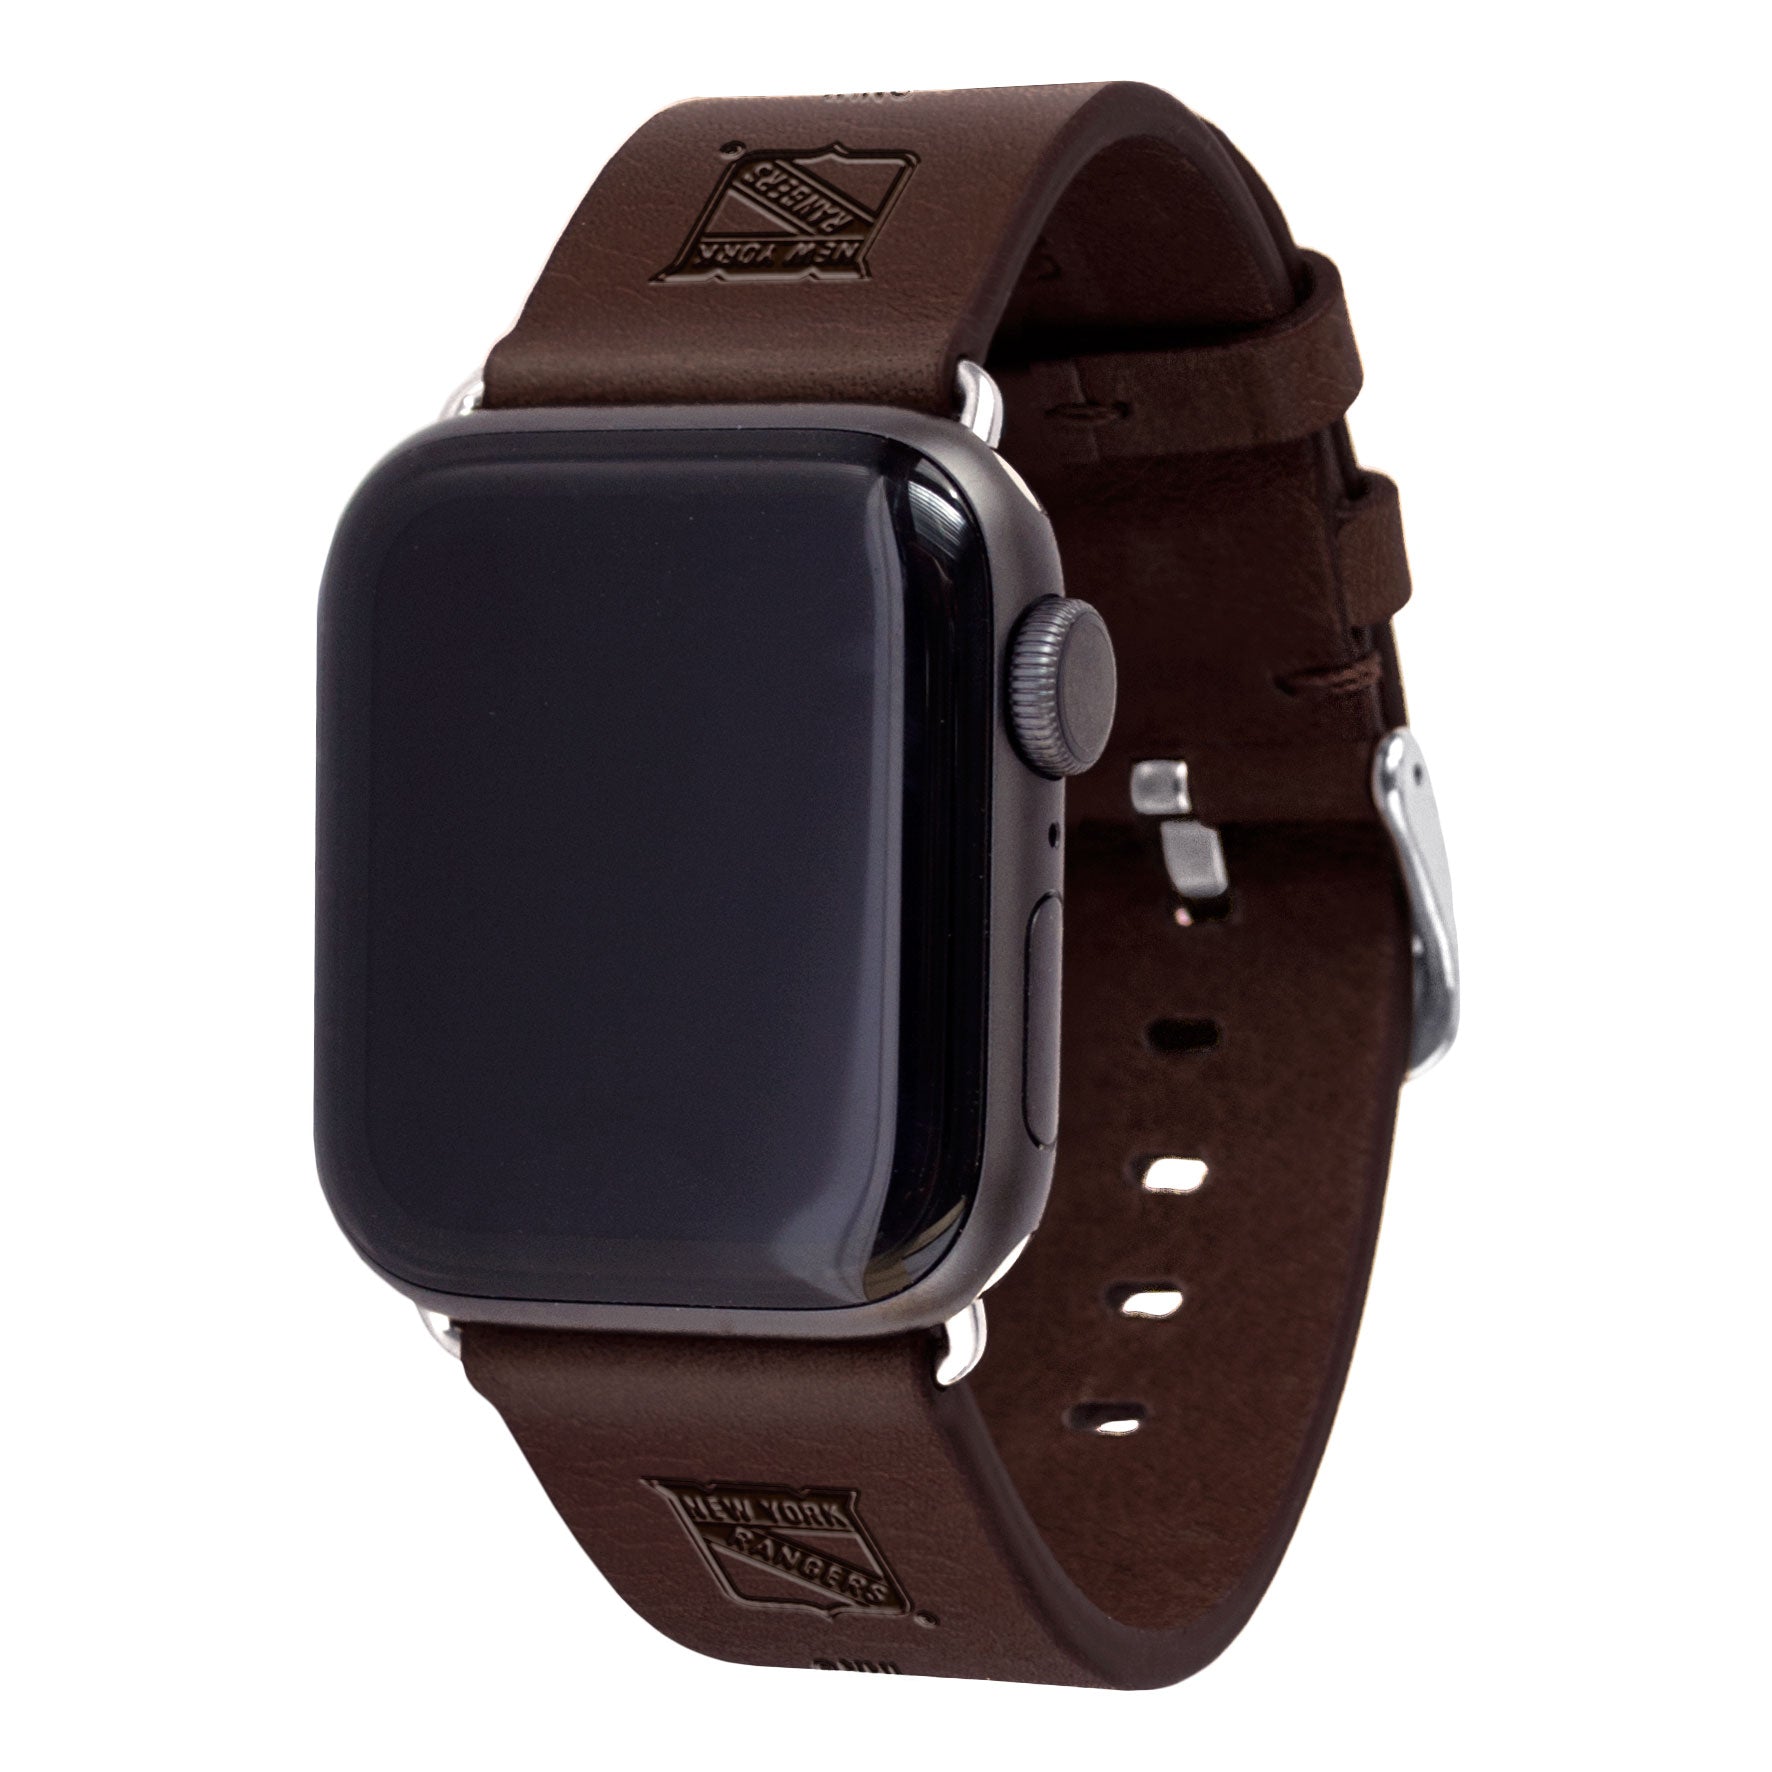 New York Rangers Leather Apple Watch Band - AffinityBands